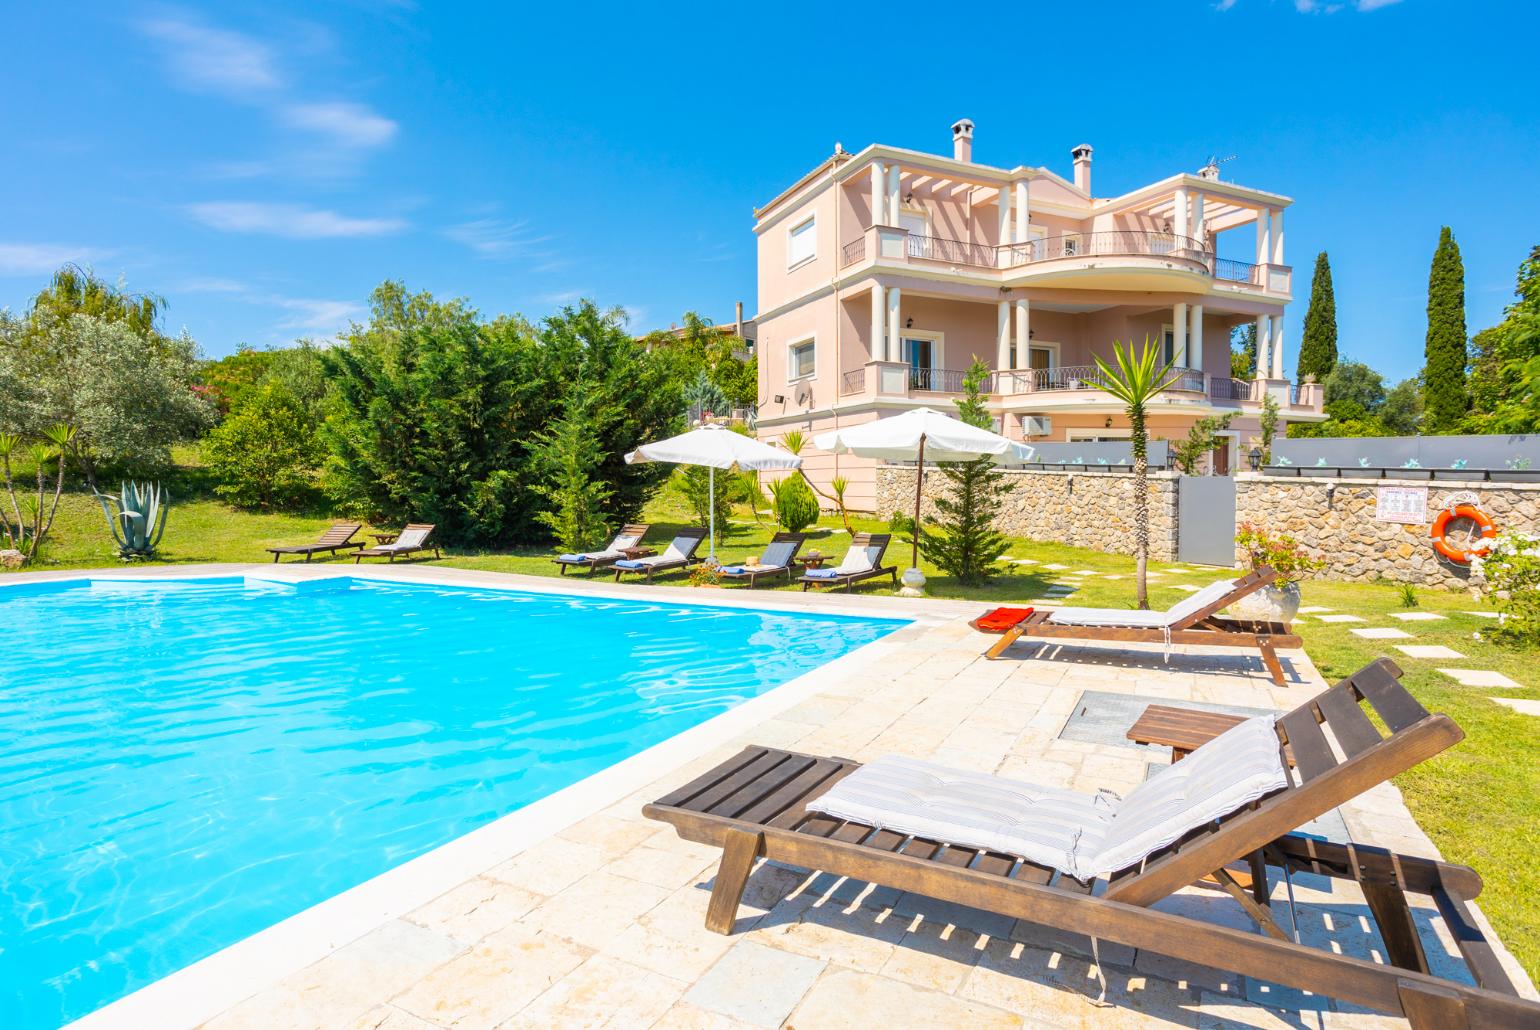 Beautiful villa with private pool, terraces, and garden